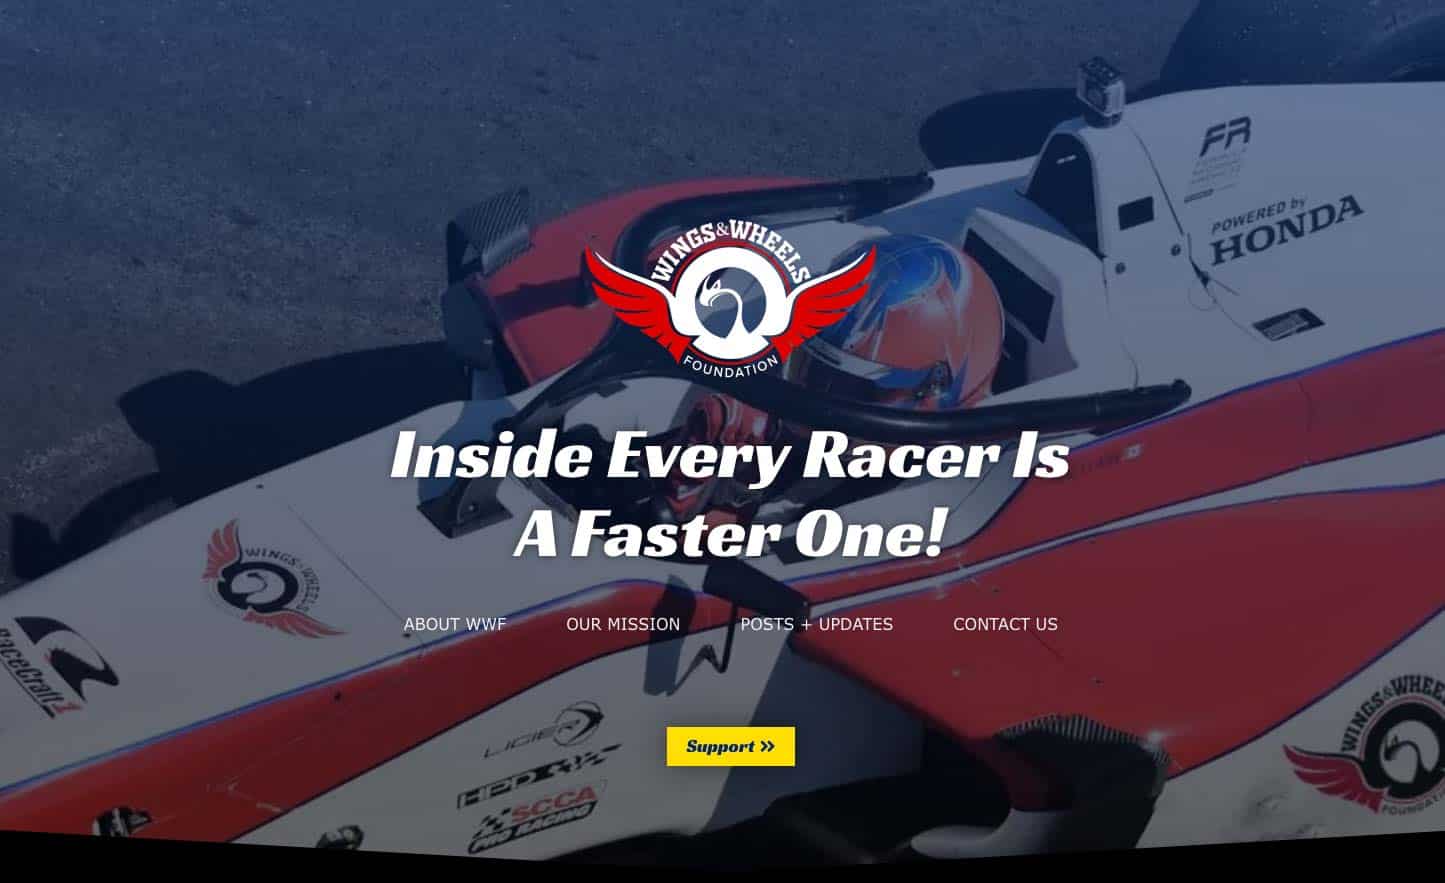 Inside Every Racer is a Faster One!